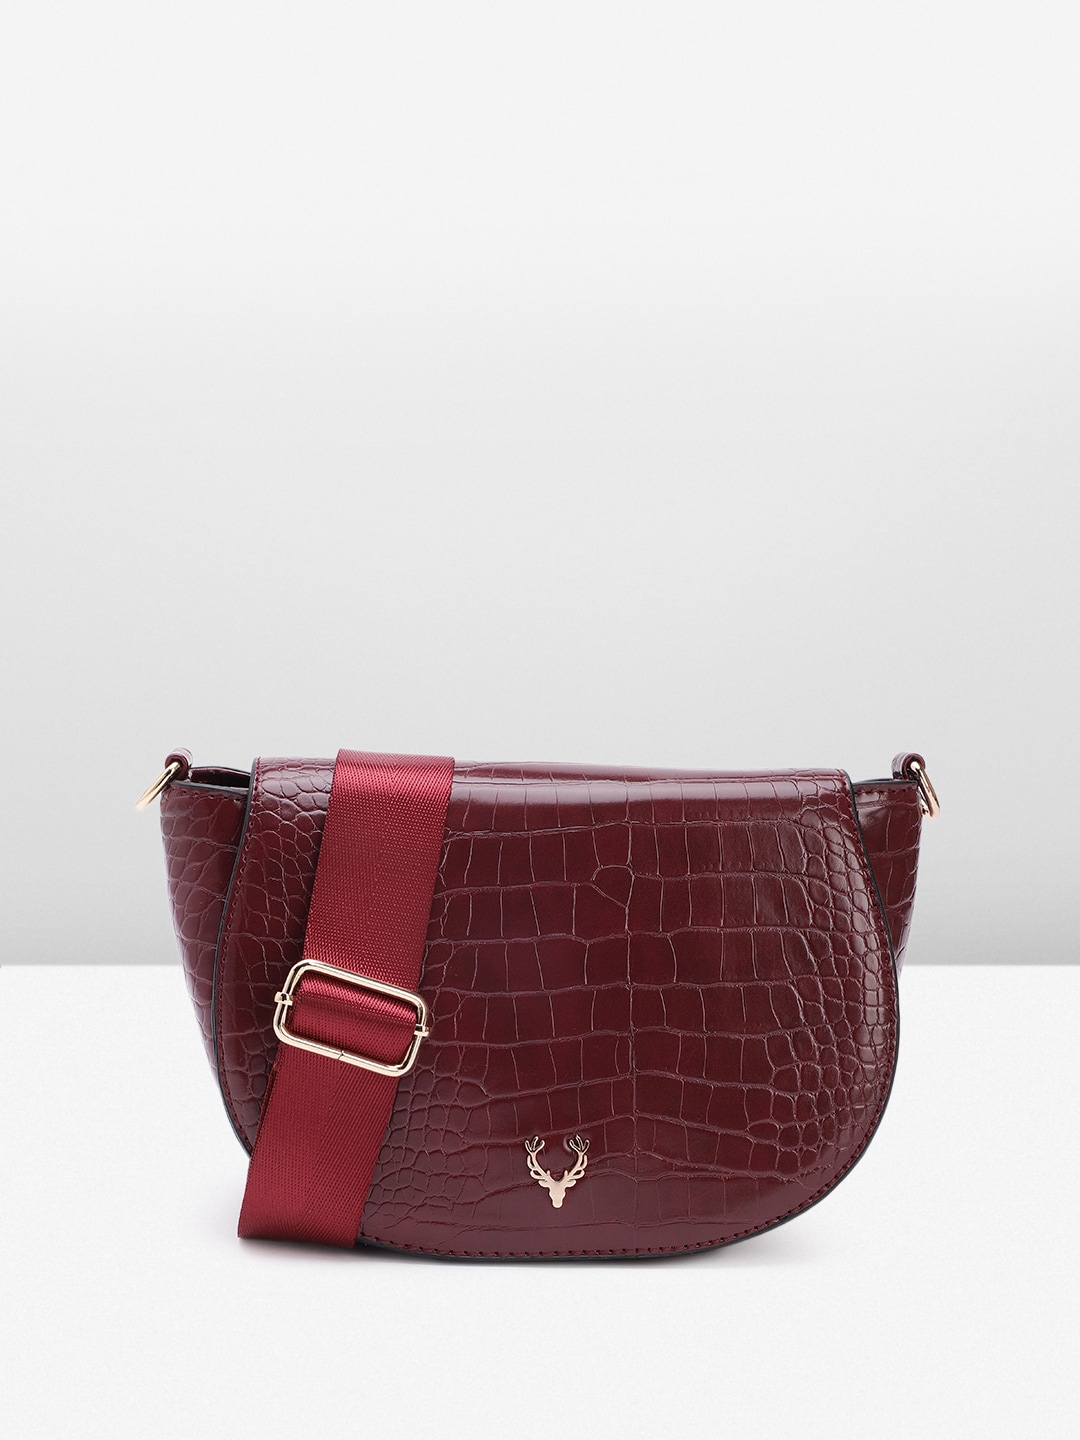 Allen Solly Animal Textured Structured Sling Bag